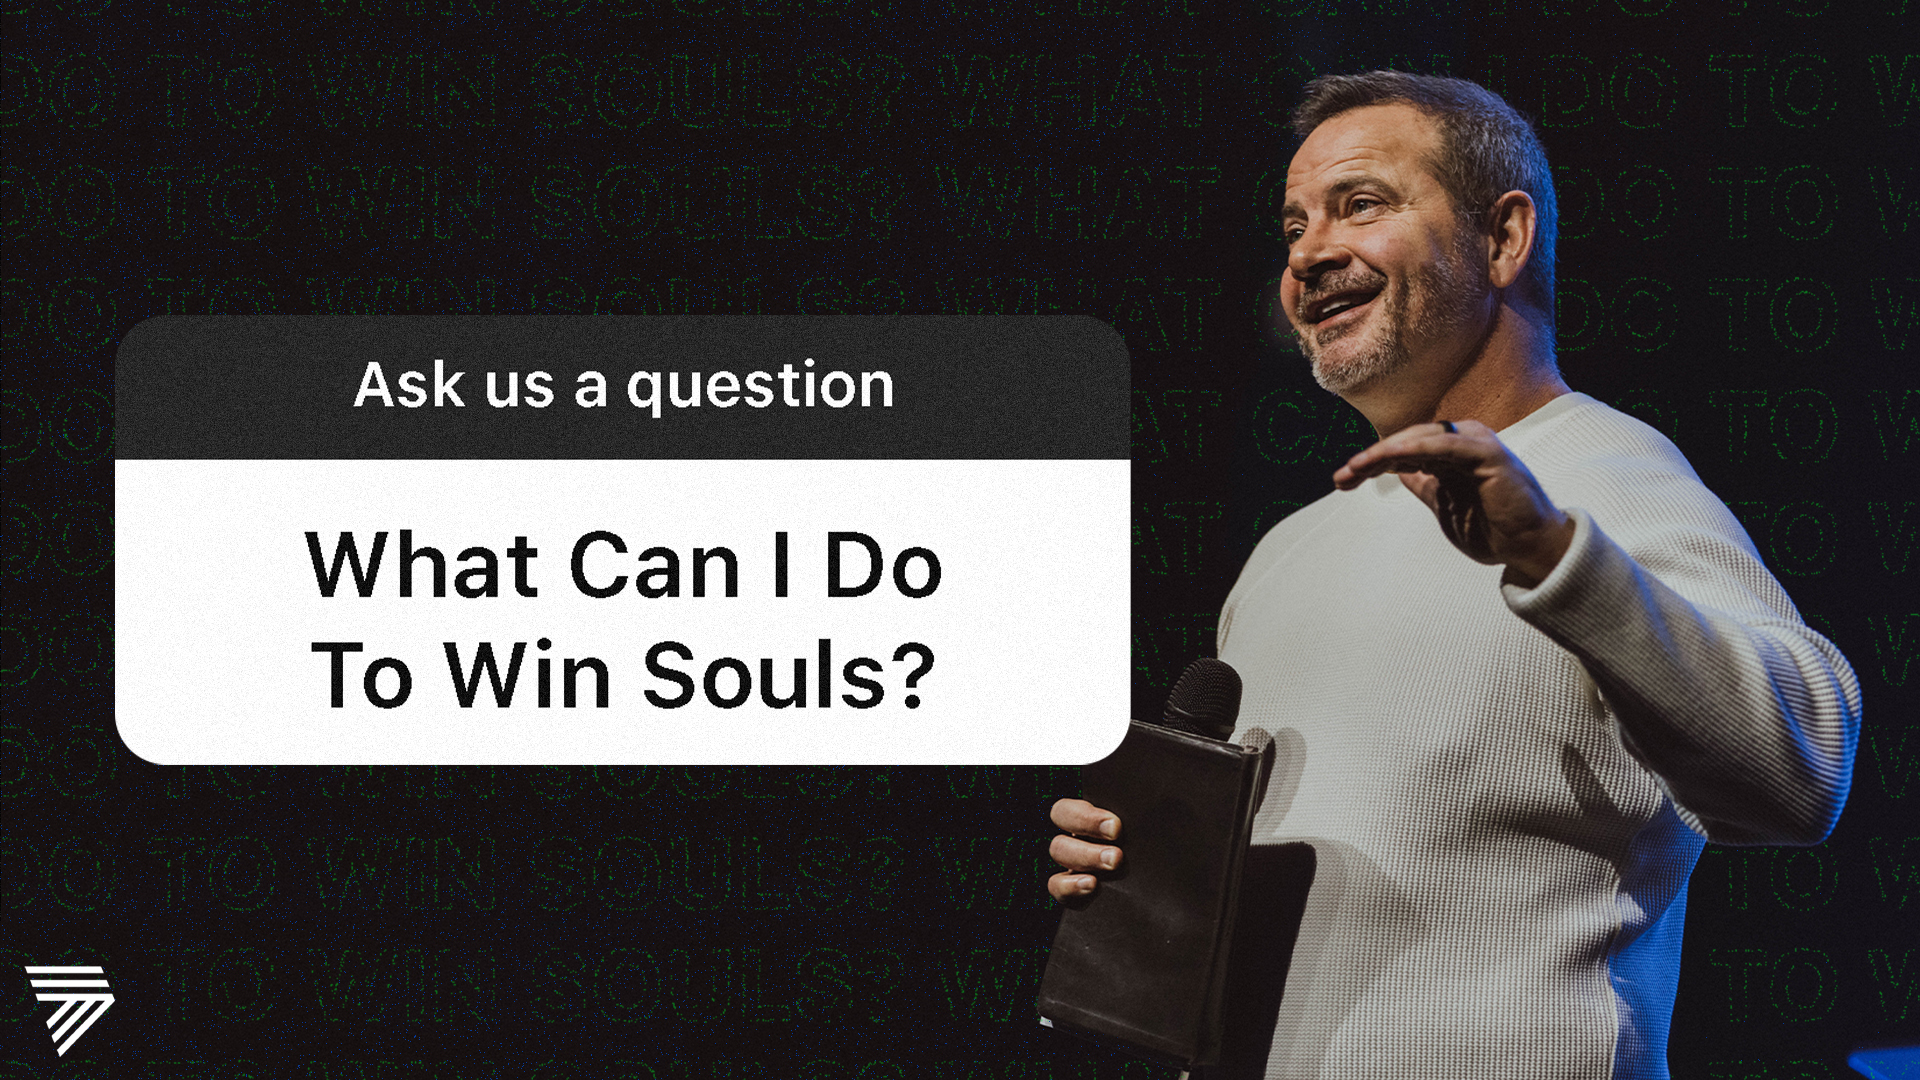 What Can I Do to Win Souls?